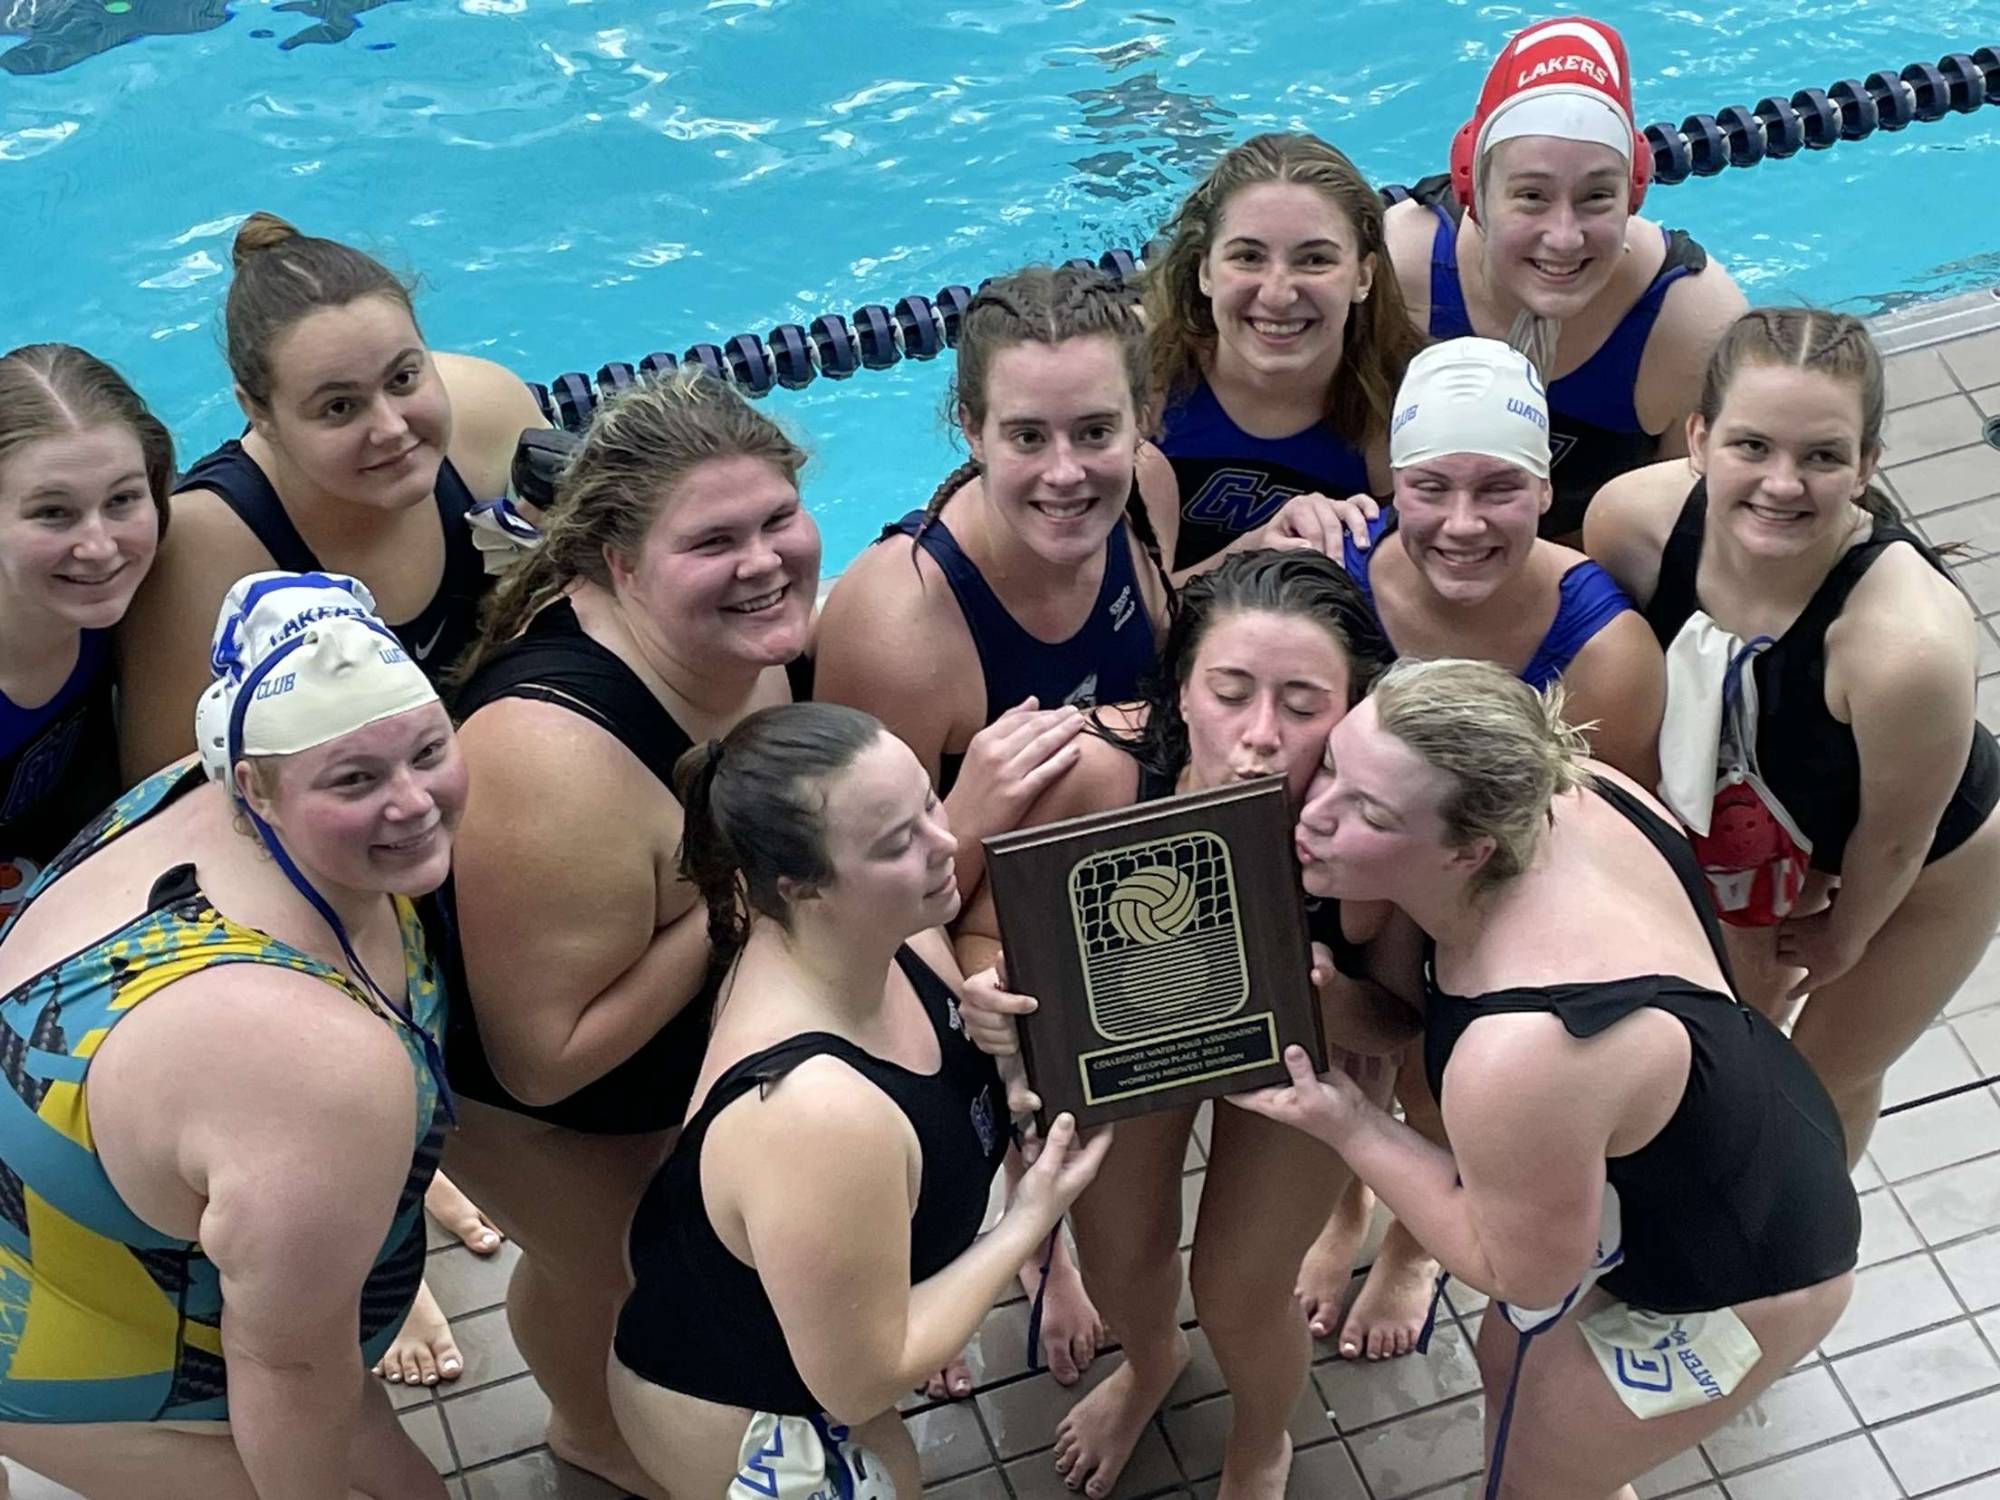 Women's Water Polo Club - Club Sports - Grand Valley State University